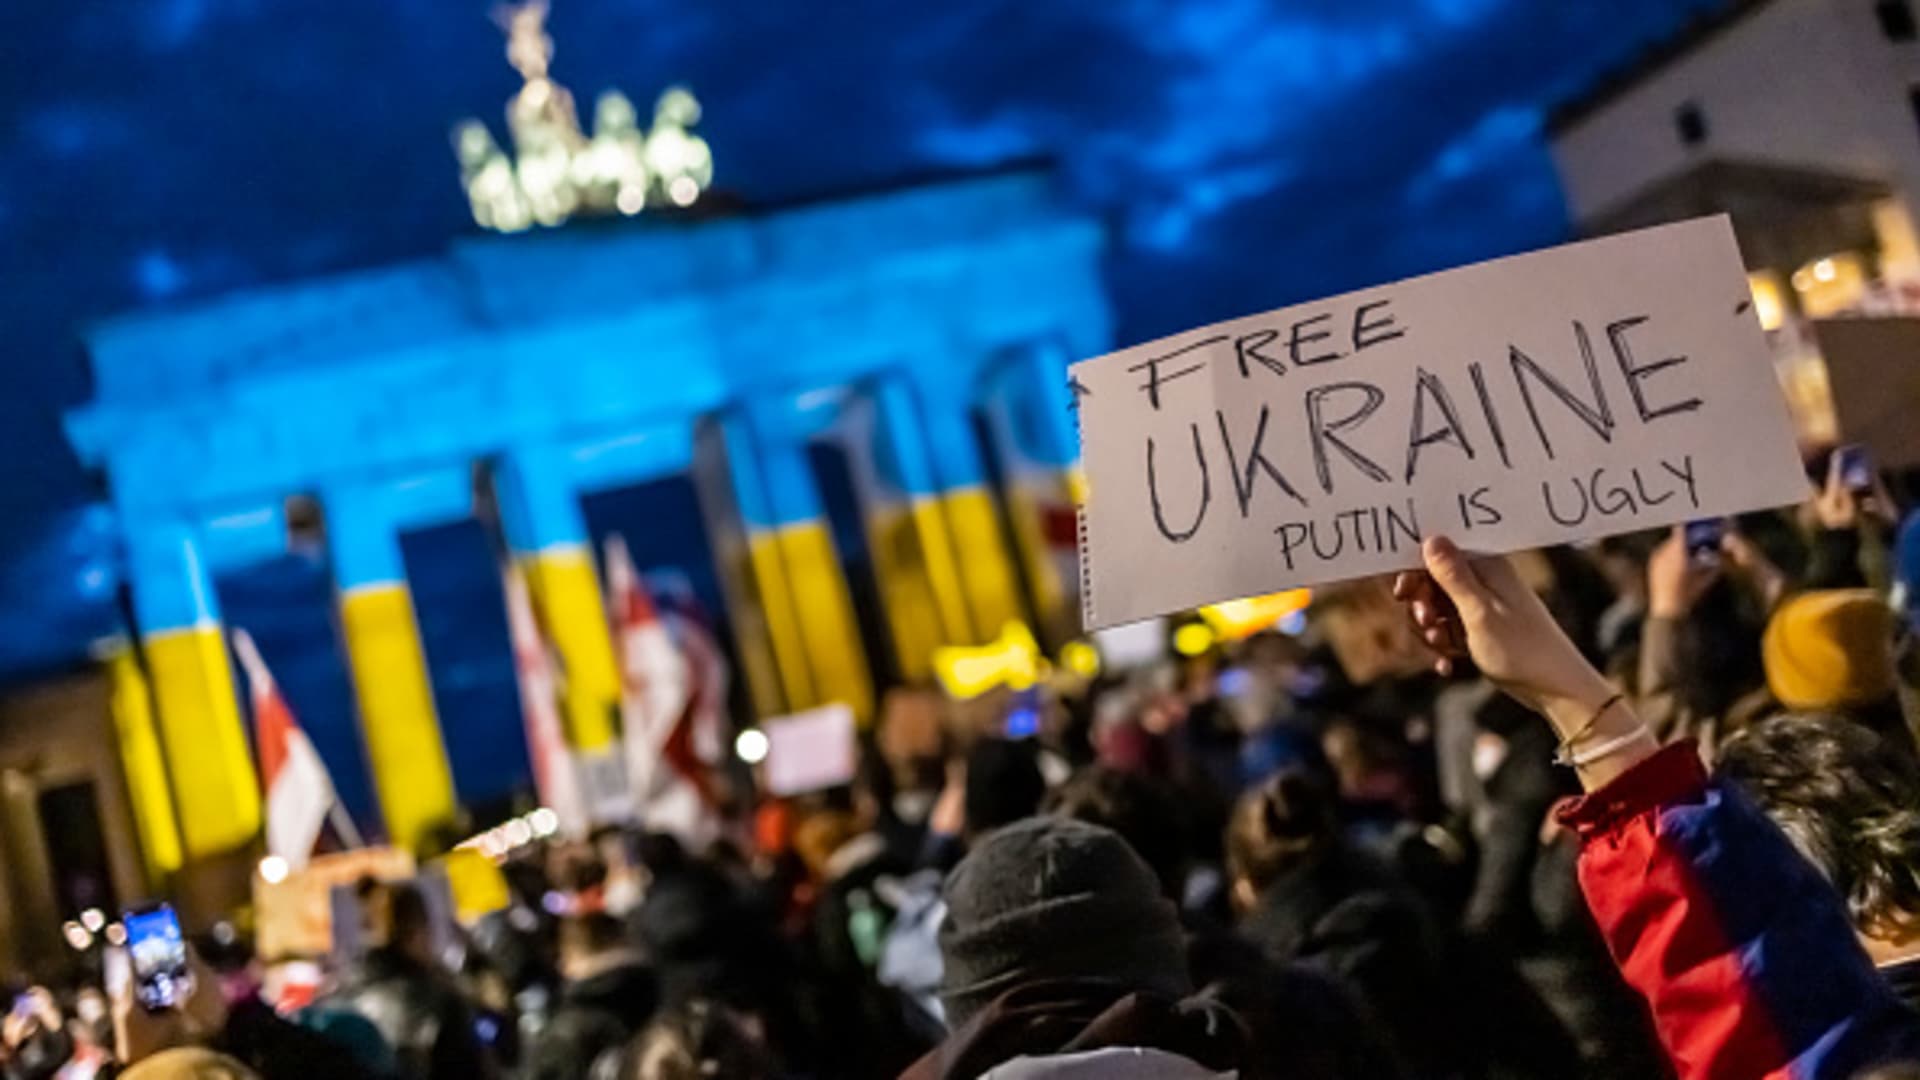 People protest in front of the Brandenburg gate against the Russian invasion of Ukraine on February 24, 2022 in Berlin, Germany. Russia has begun a large-scale attack on Ukraine, with explosions reported in multiple cities and far outside the restive eastern regions held by Russian-backed rebels.